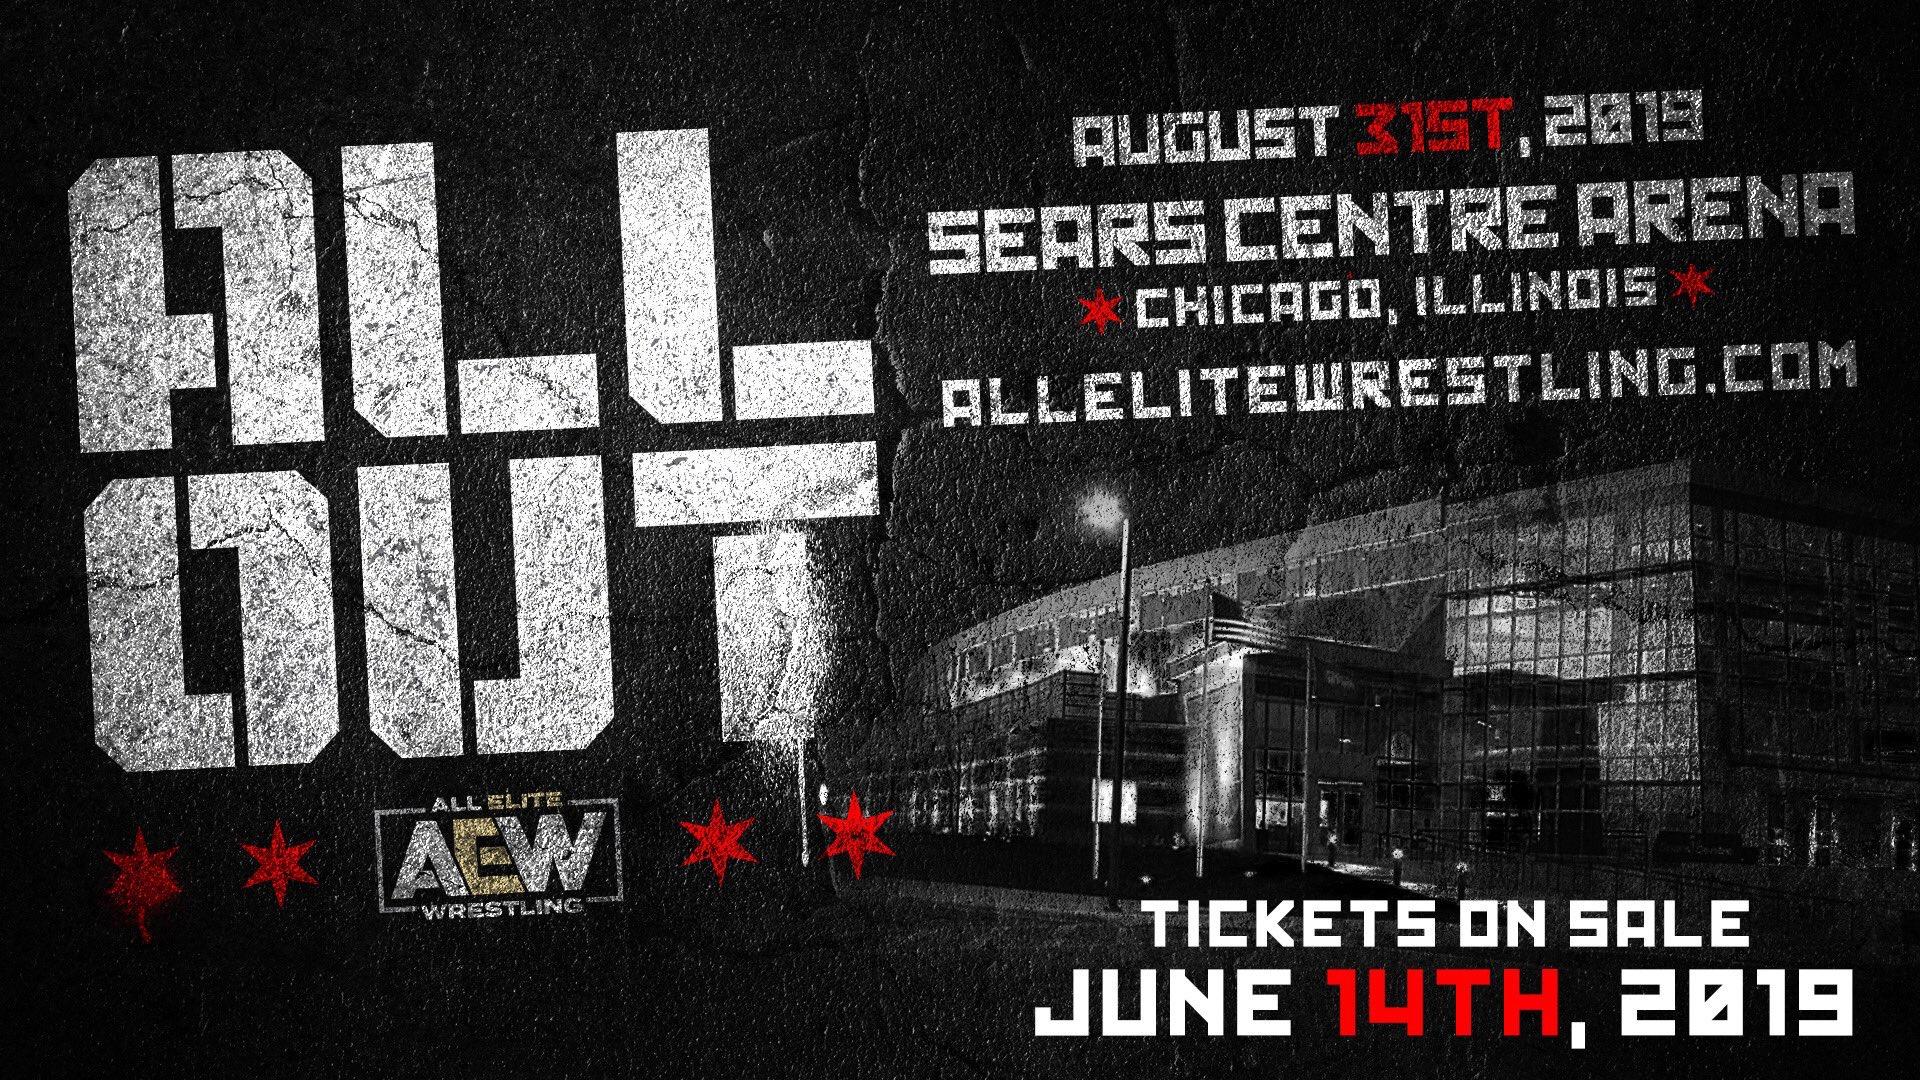 News. All Elite Wrestling set to go “ALL OUT” in Chicago